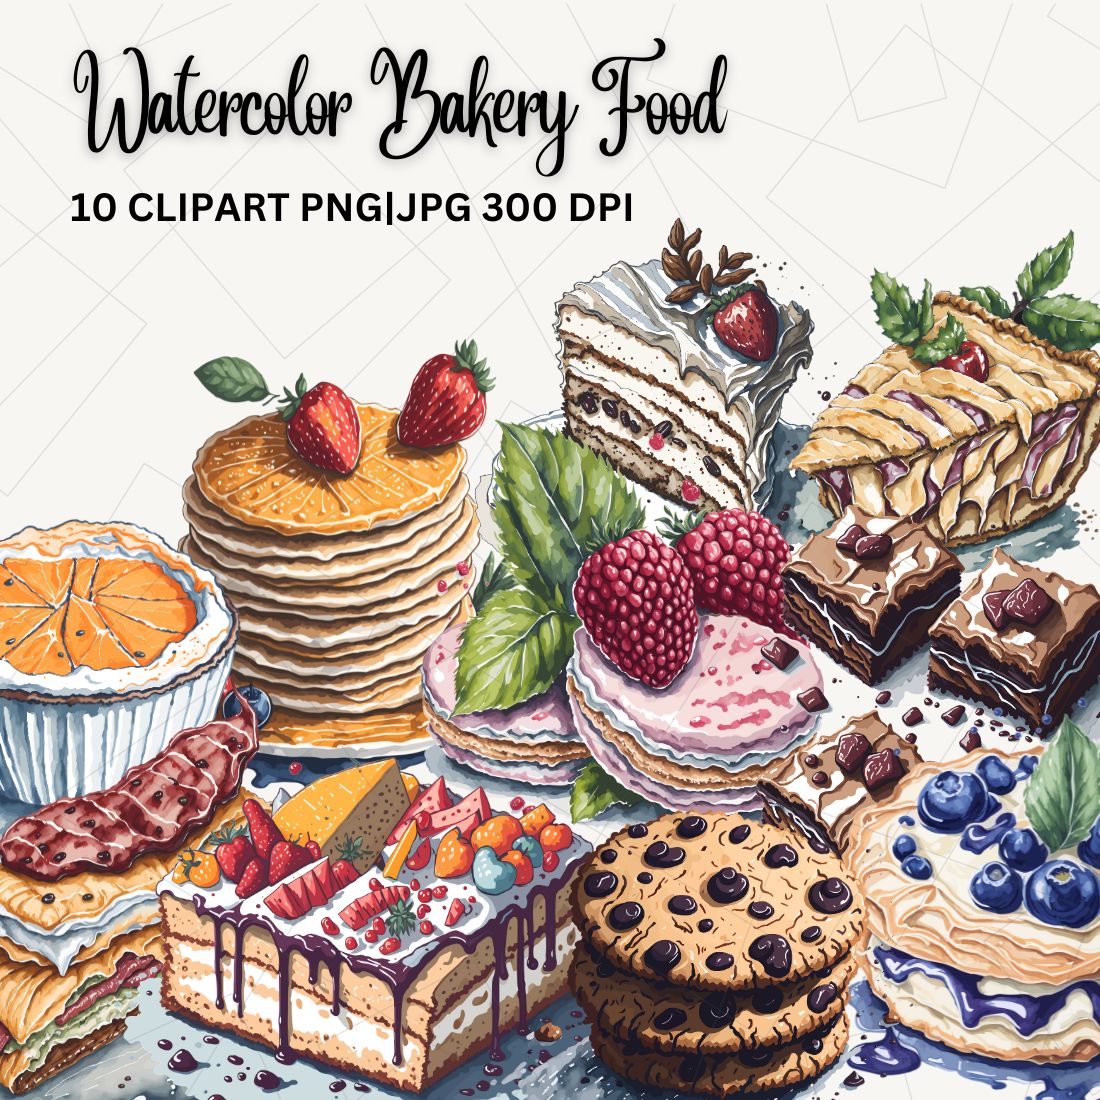 Watercolor Bakery Food Sublimation Clipart cover image.